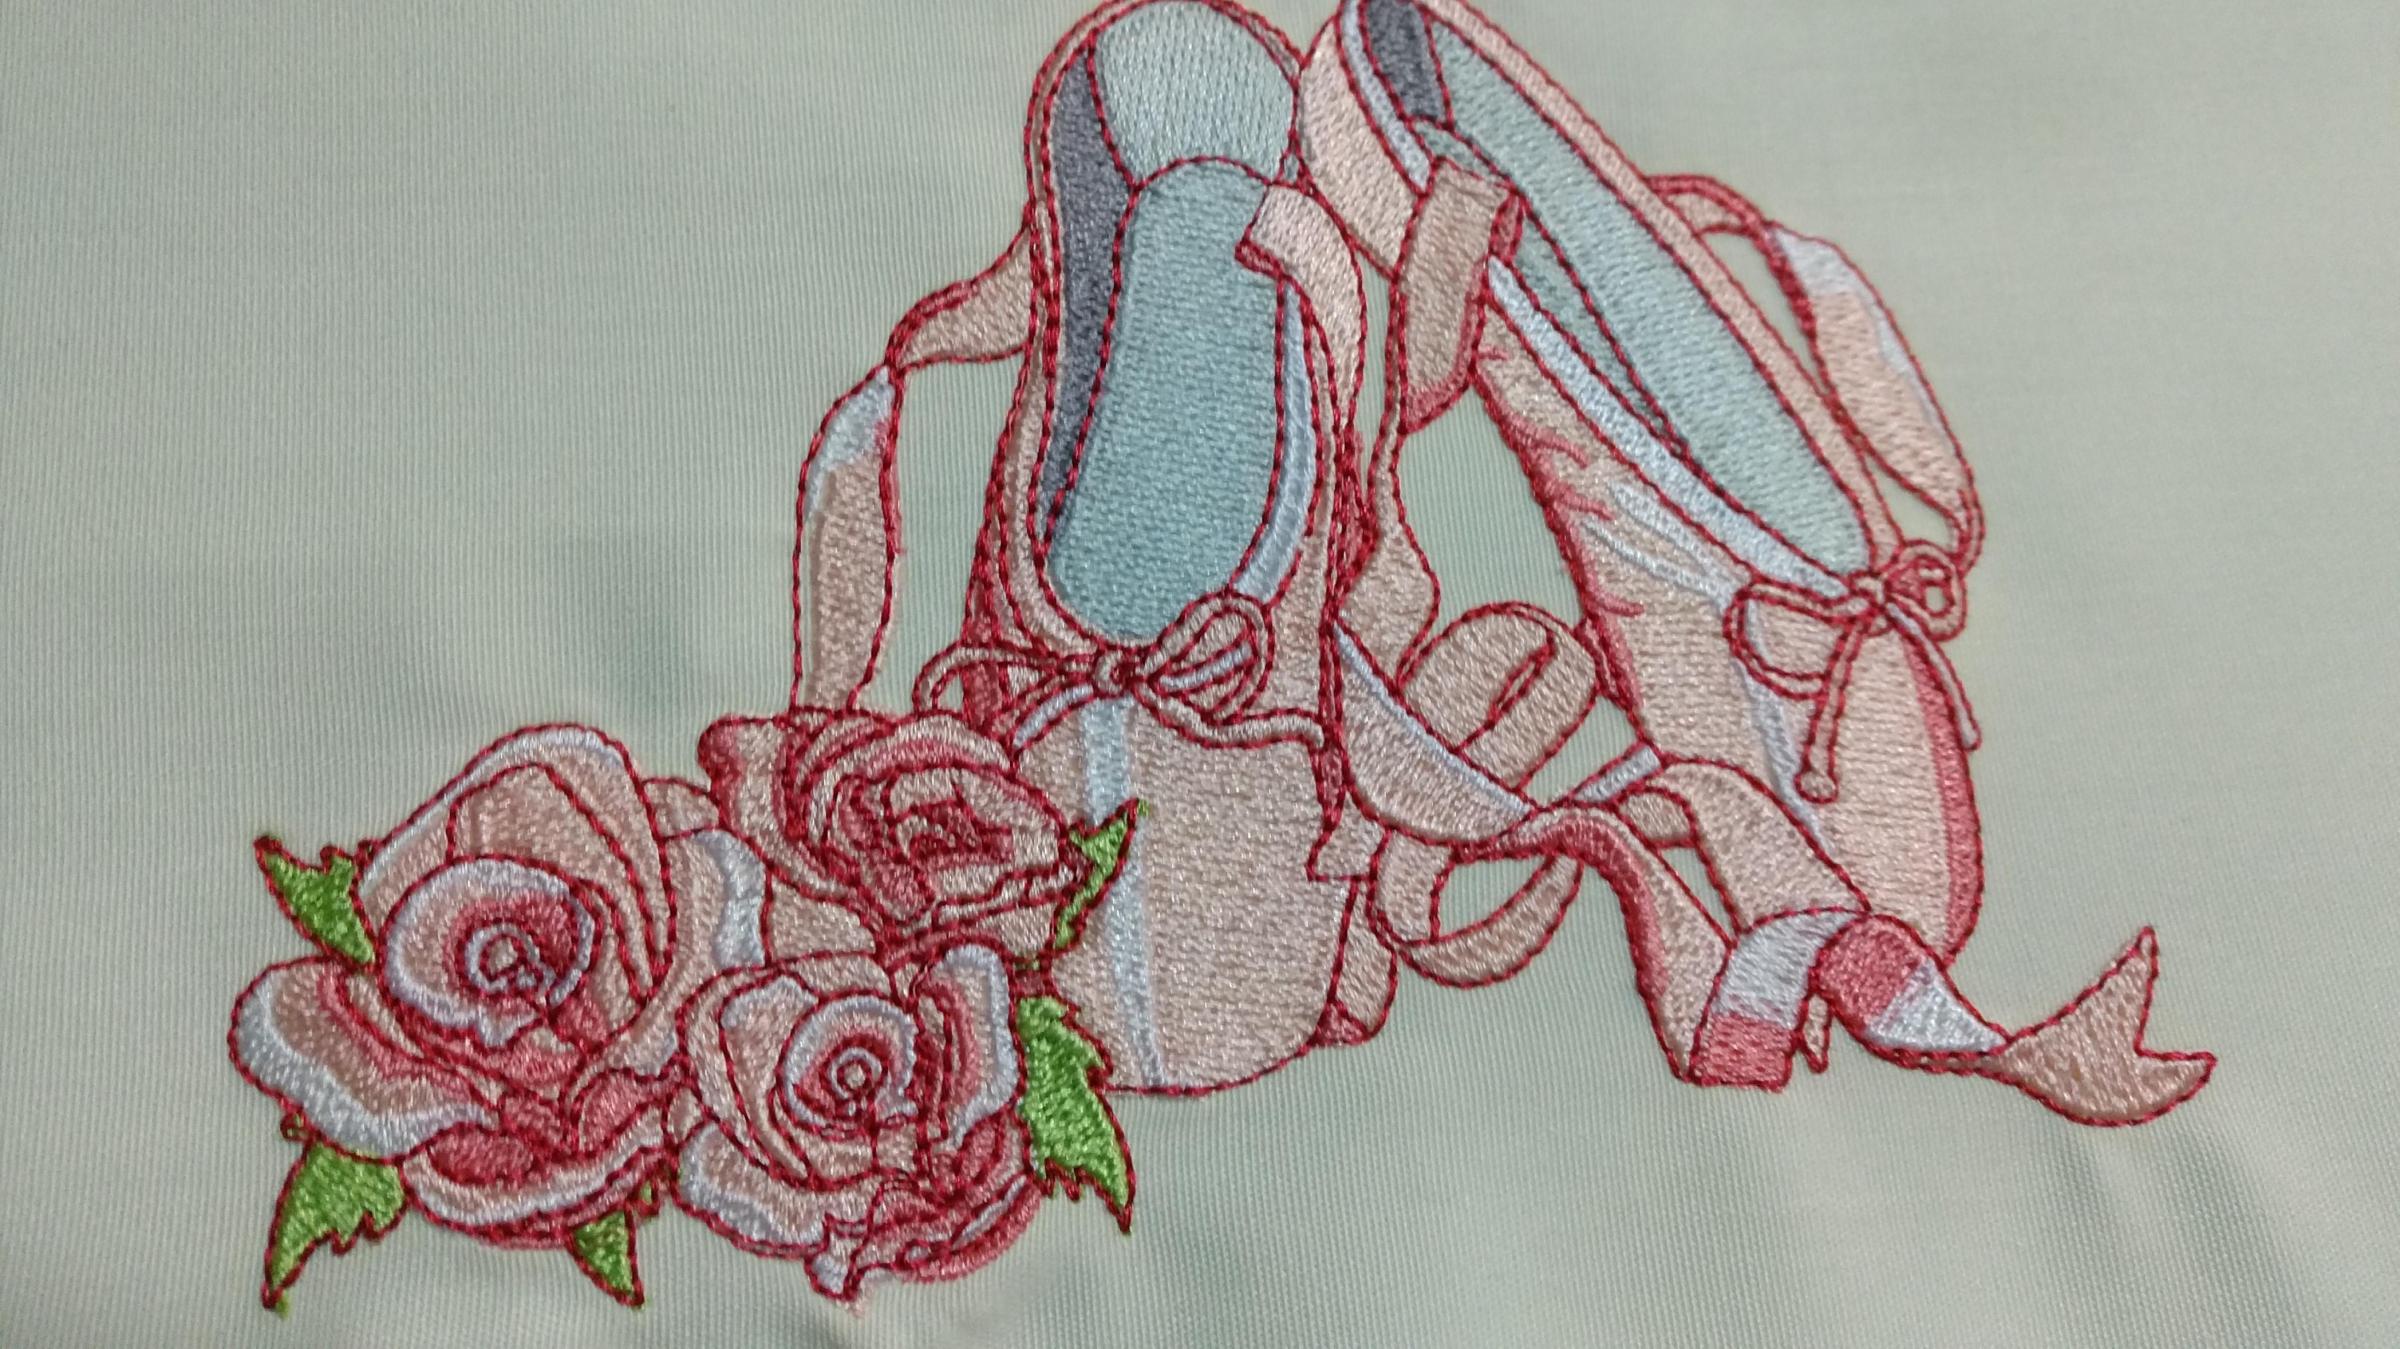 Ballet shoes and roses embroidery design